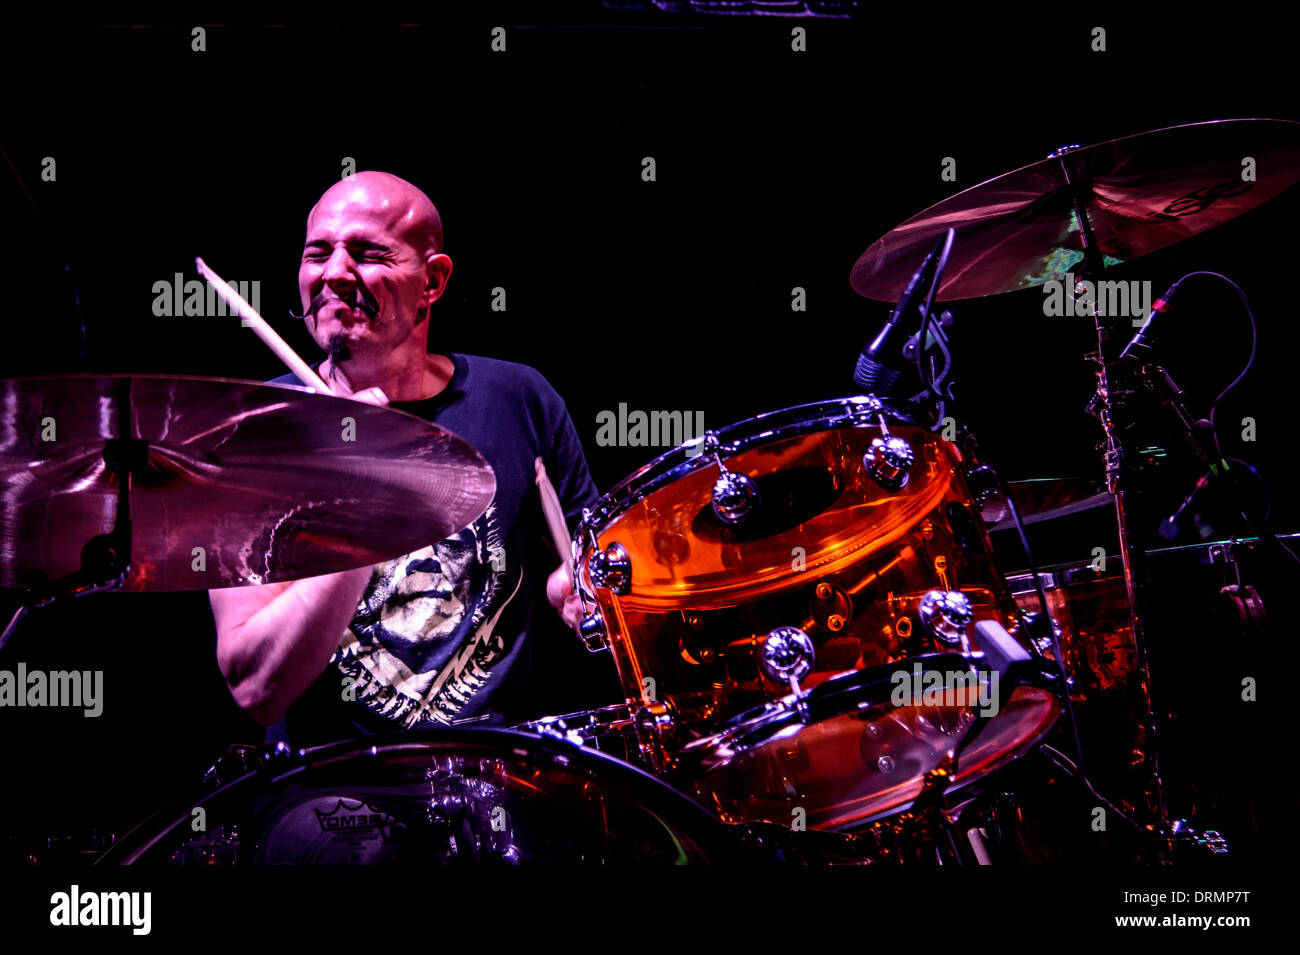 Toronto, Ontario, Canada. 24th Jan, 2014. MATT STARR. The Bonzo Bash, it is the ultimate celebration for the ultimate drummer, John Henry Bonham of Led Zeppelin. It is presented by Natal and Marshall and is a night filled with amazing drummers playing their favorite Led Zeppelin song. It is a complete evening of Led Zeppelin jams and this year was a crazy one! It was be hosted by Mike Portnoy, Carmine Appice and the show creator, Brian Tichy at The Observatory club in Santa Ana, CA. © Igor Vidyashev/ZUMAPRESS.com/Alamy Live News Stock Photo